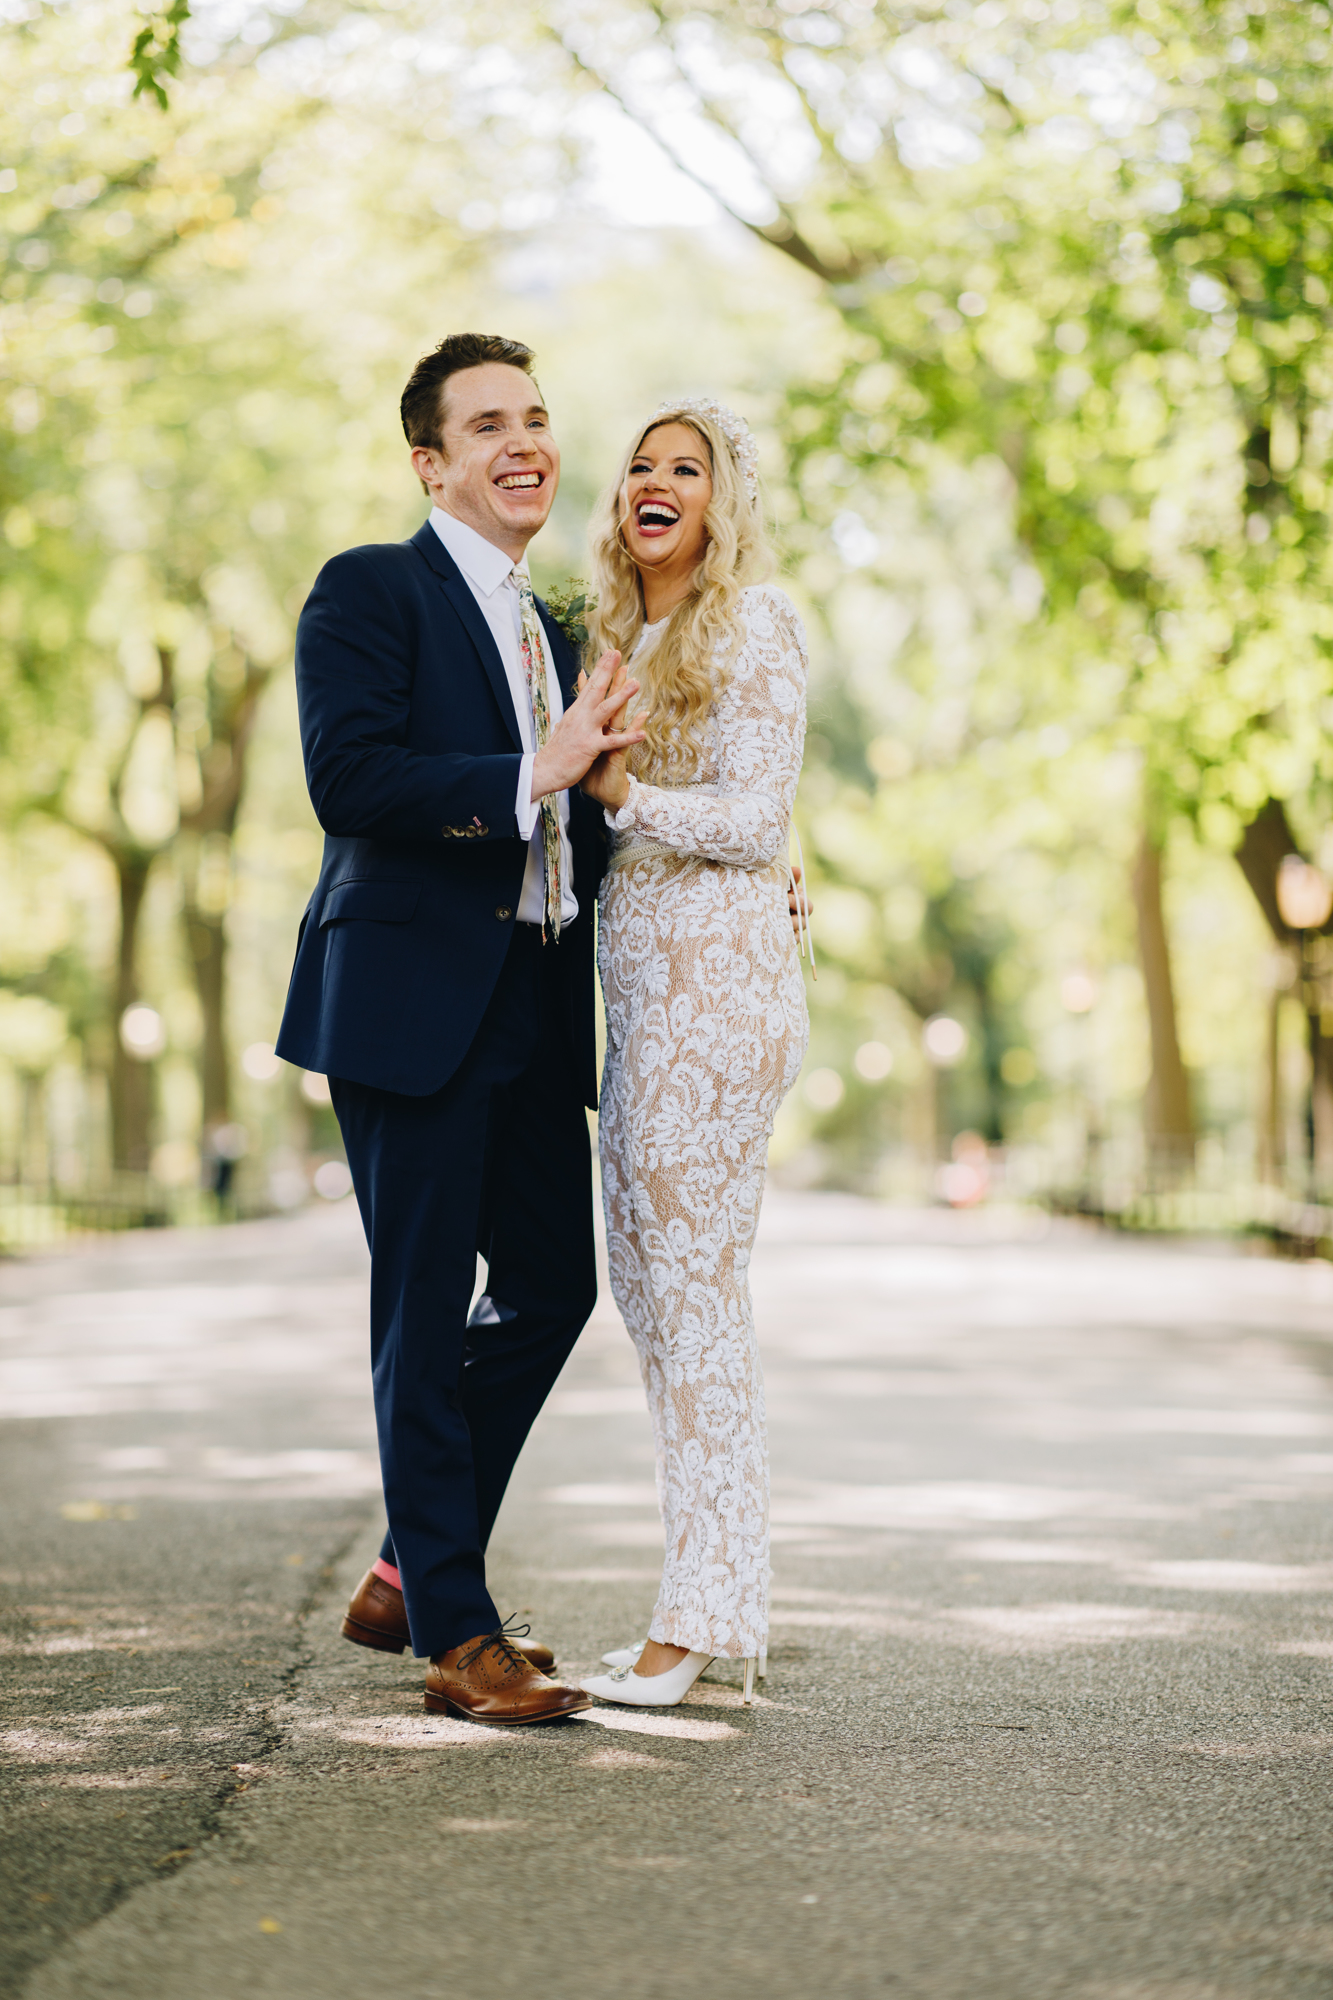 Beautiful Engagement Photo Locations in Central Park